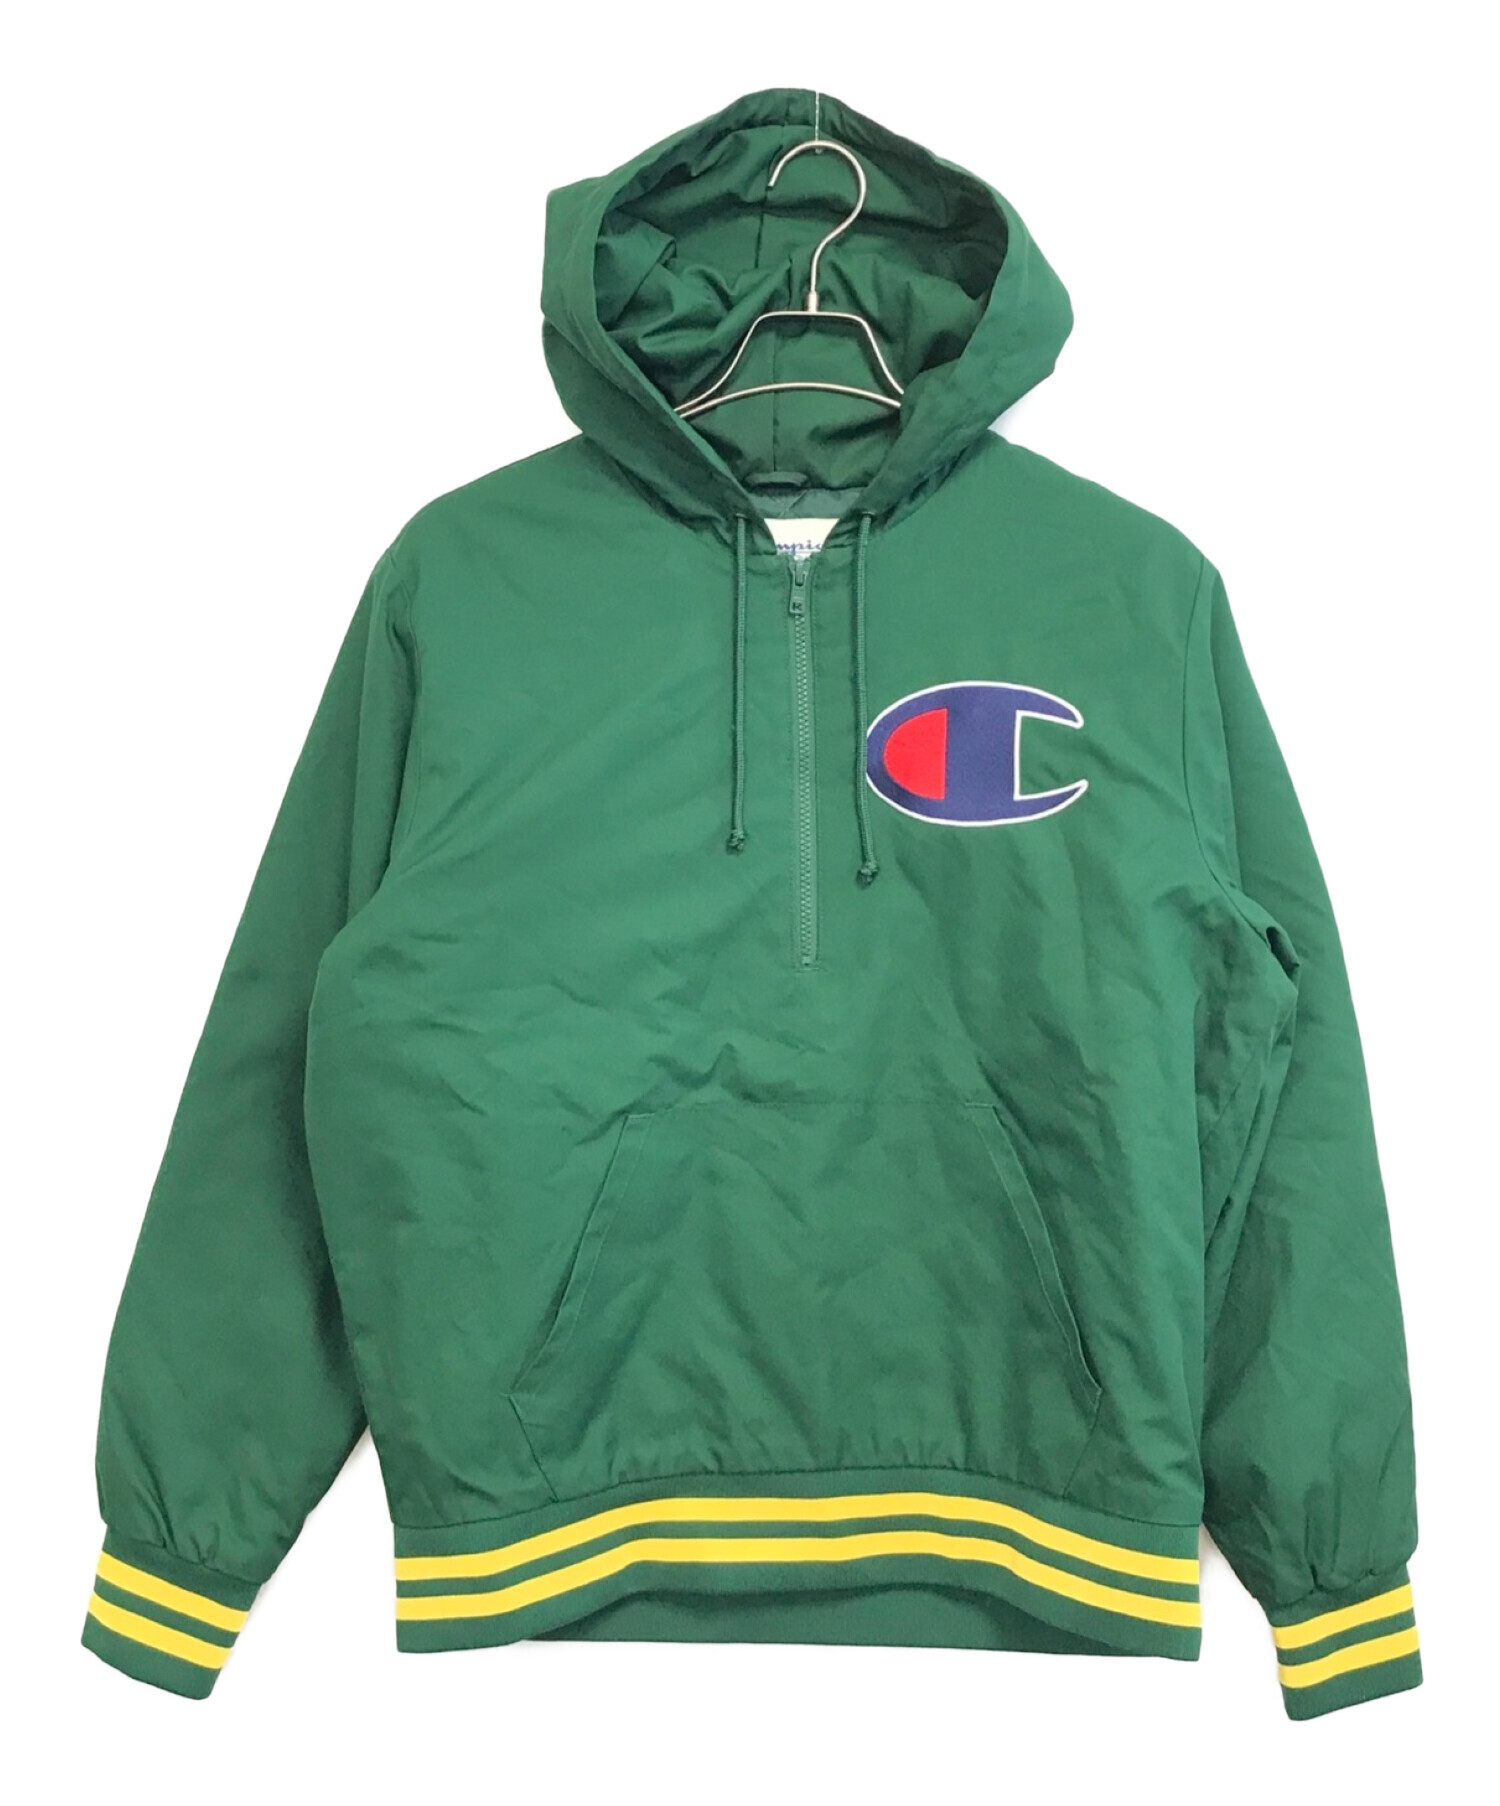 S Champion Sherpa Lined Hooded Jacket 緑